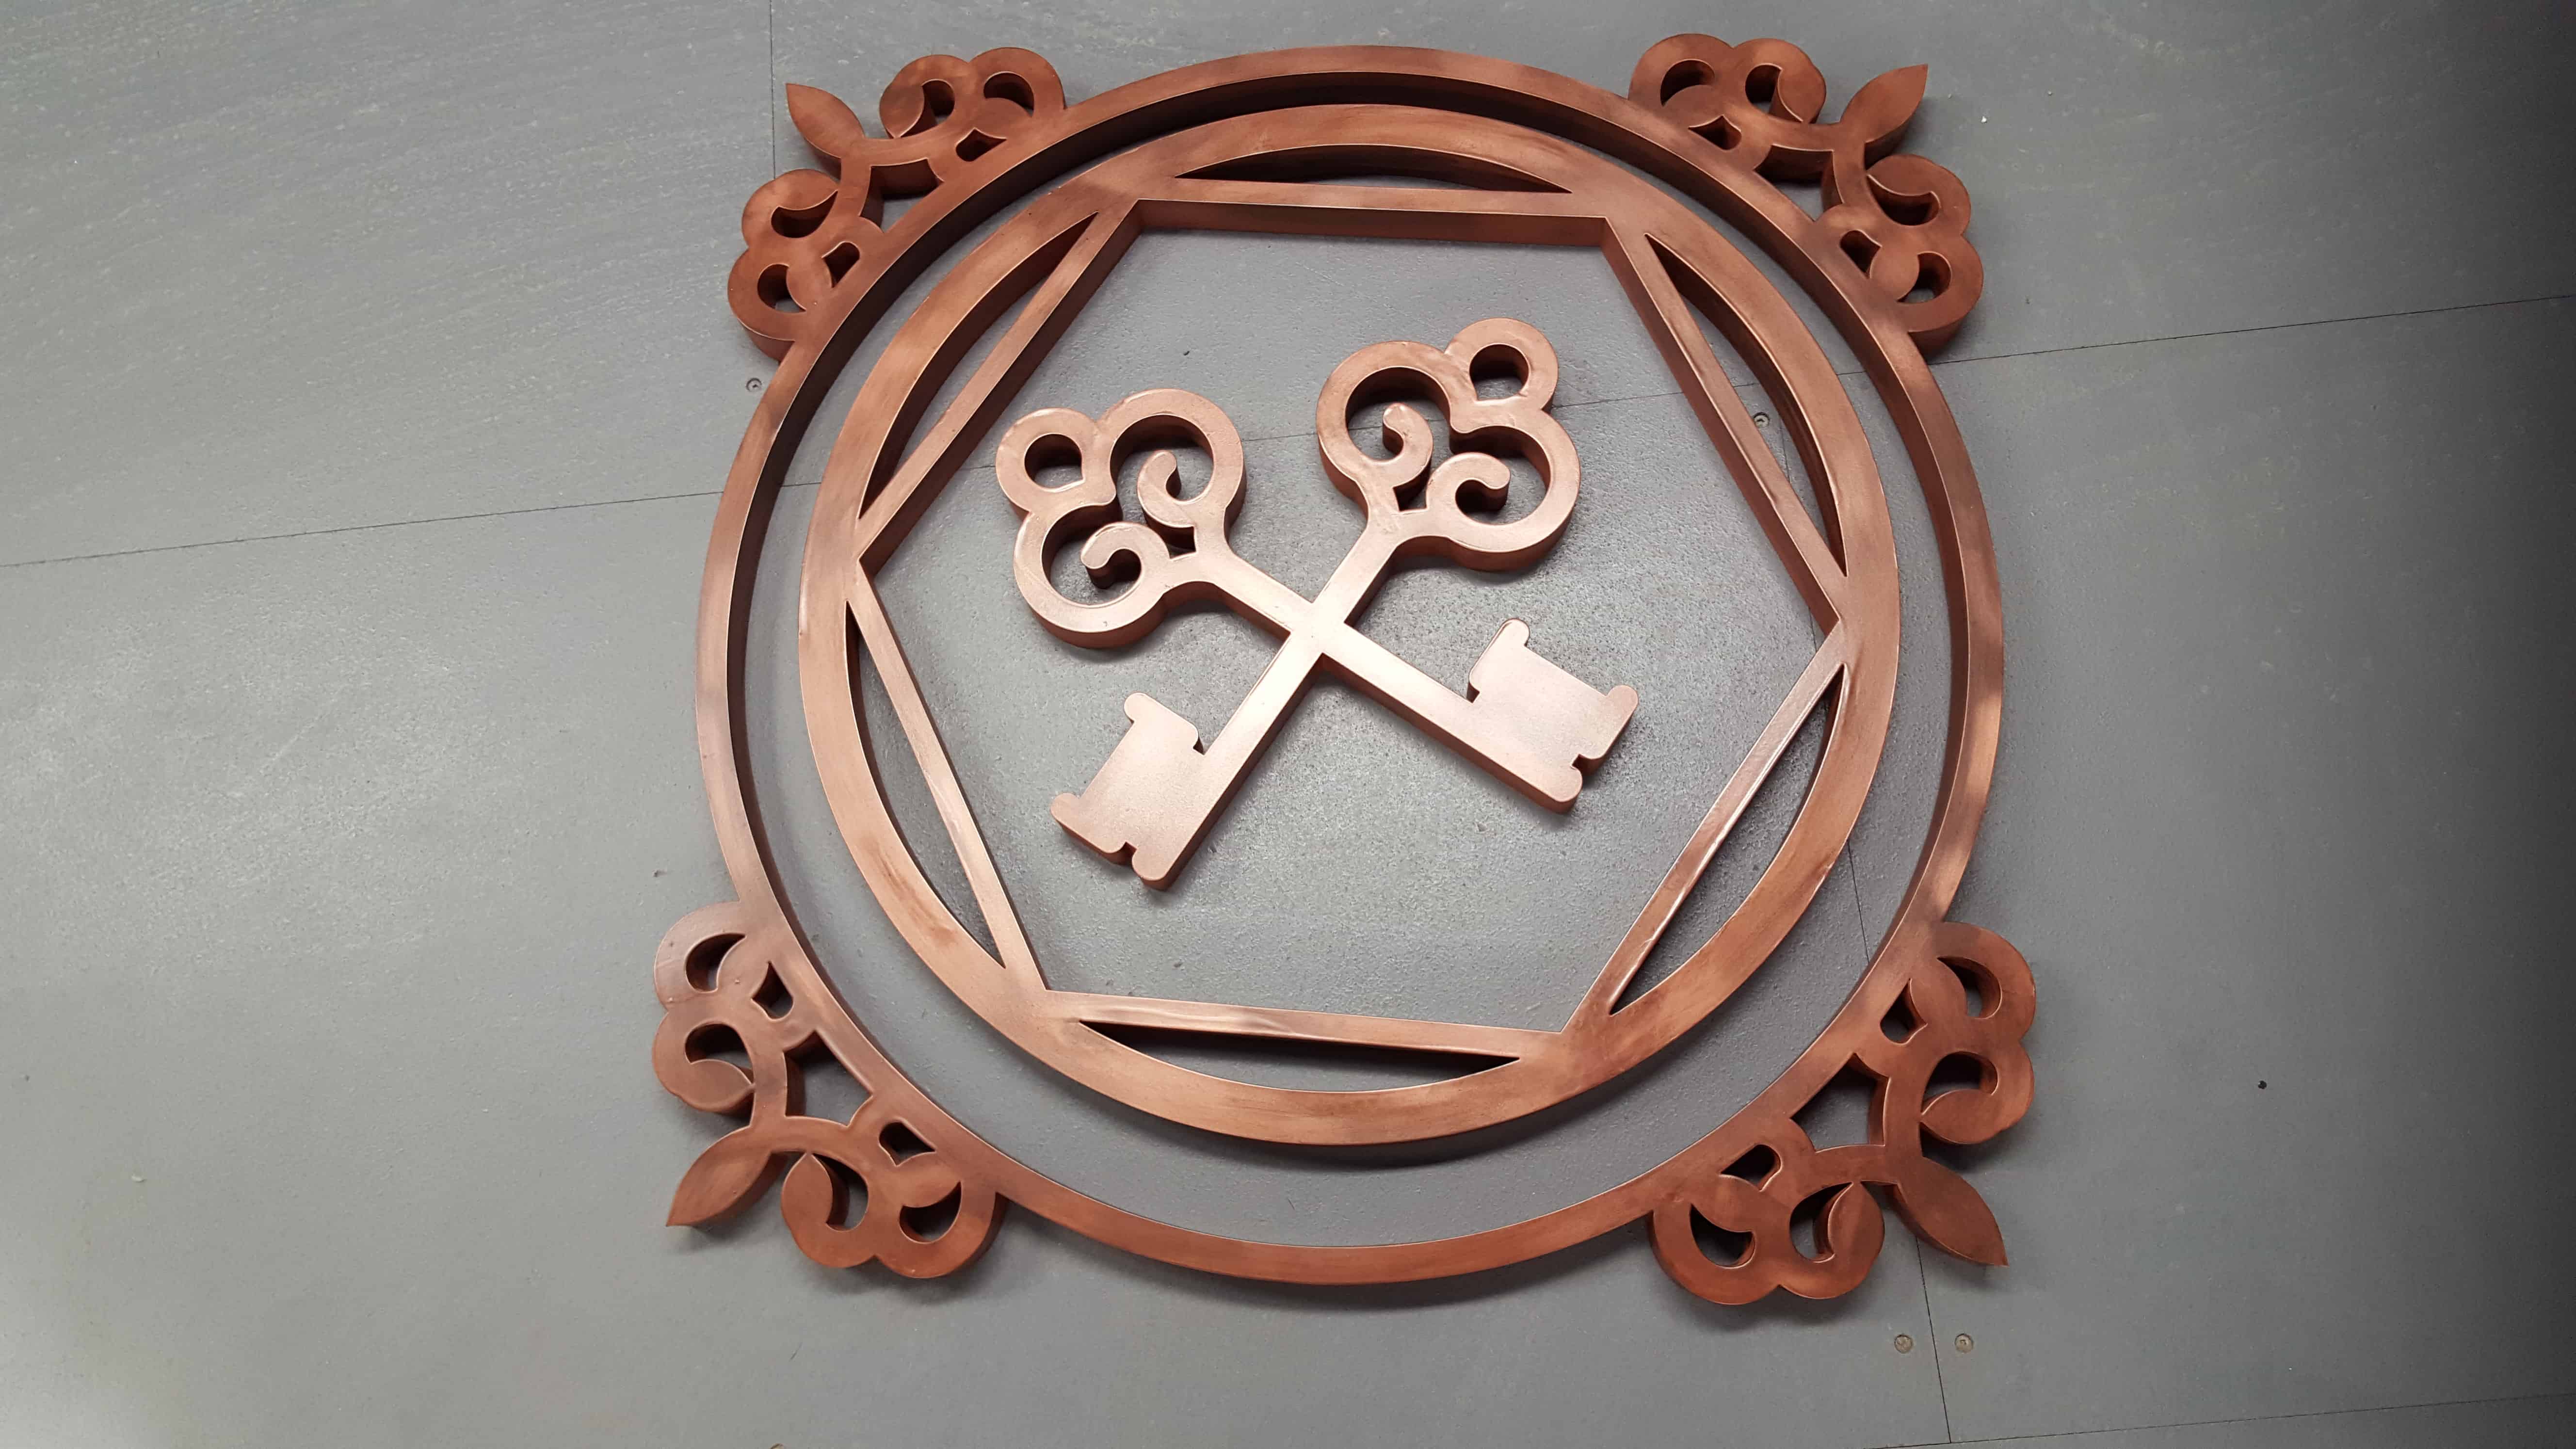 Copper Verometal Coated and Finished Design by One to One Engravers